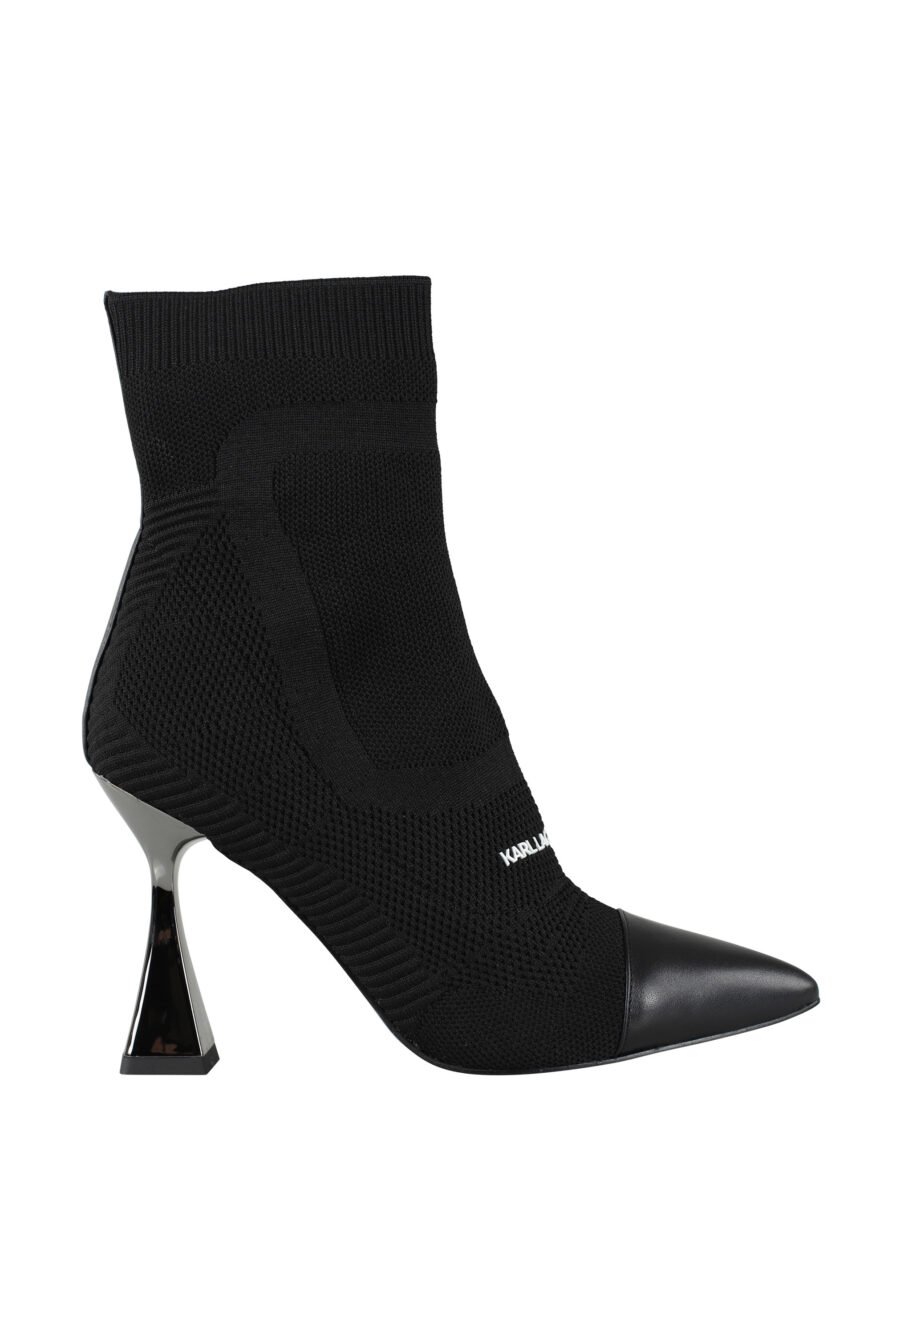 Black ankle sock ankle boots with white mini logo - IMG 9602